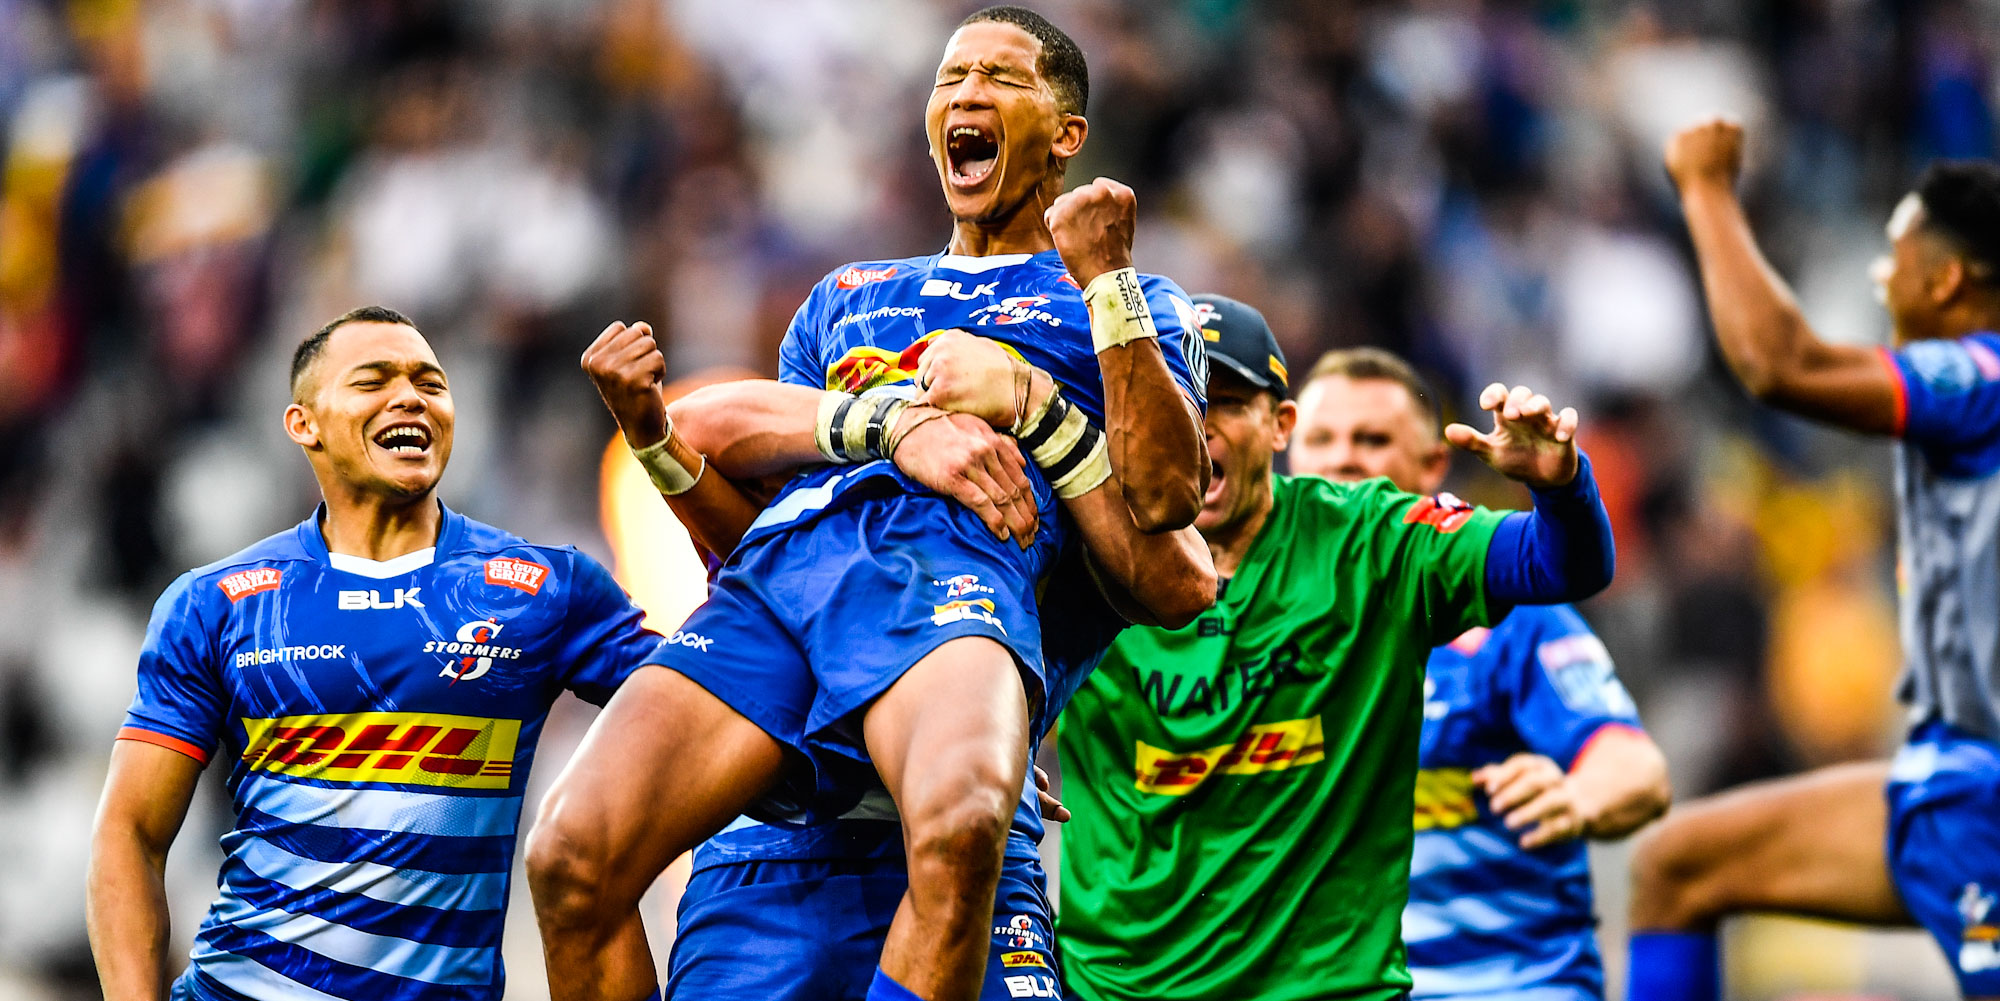 The DHL Stormers celebrate their first semi-final victory since 2010.